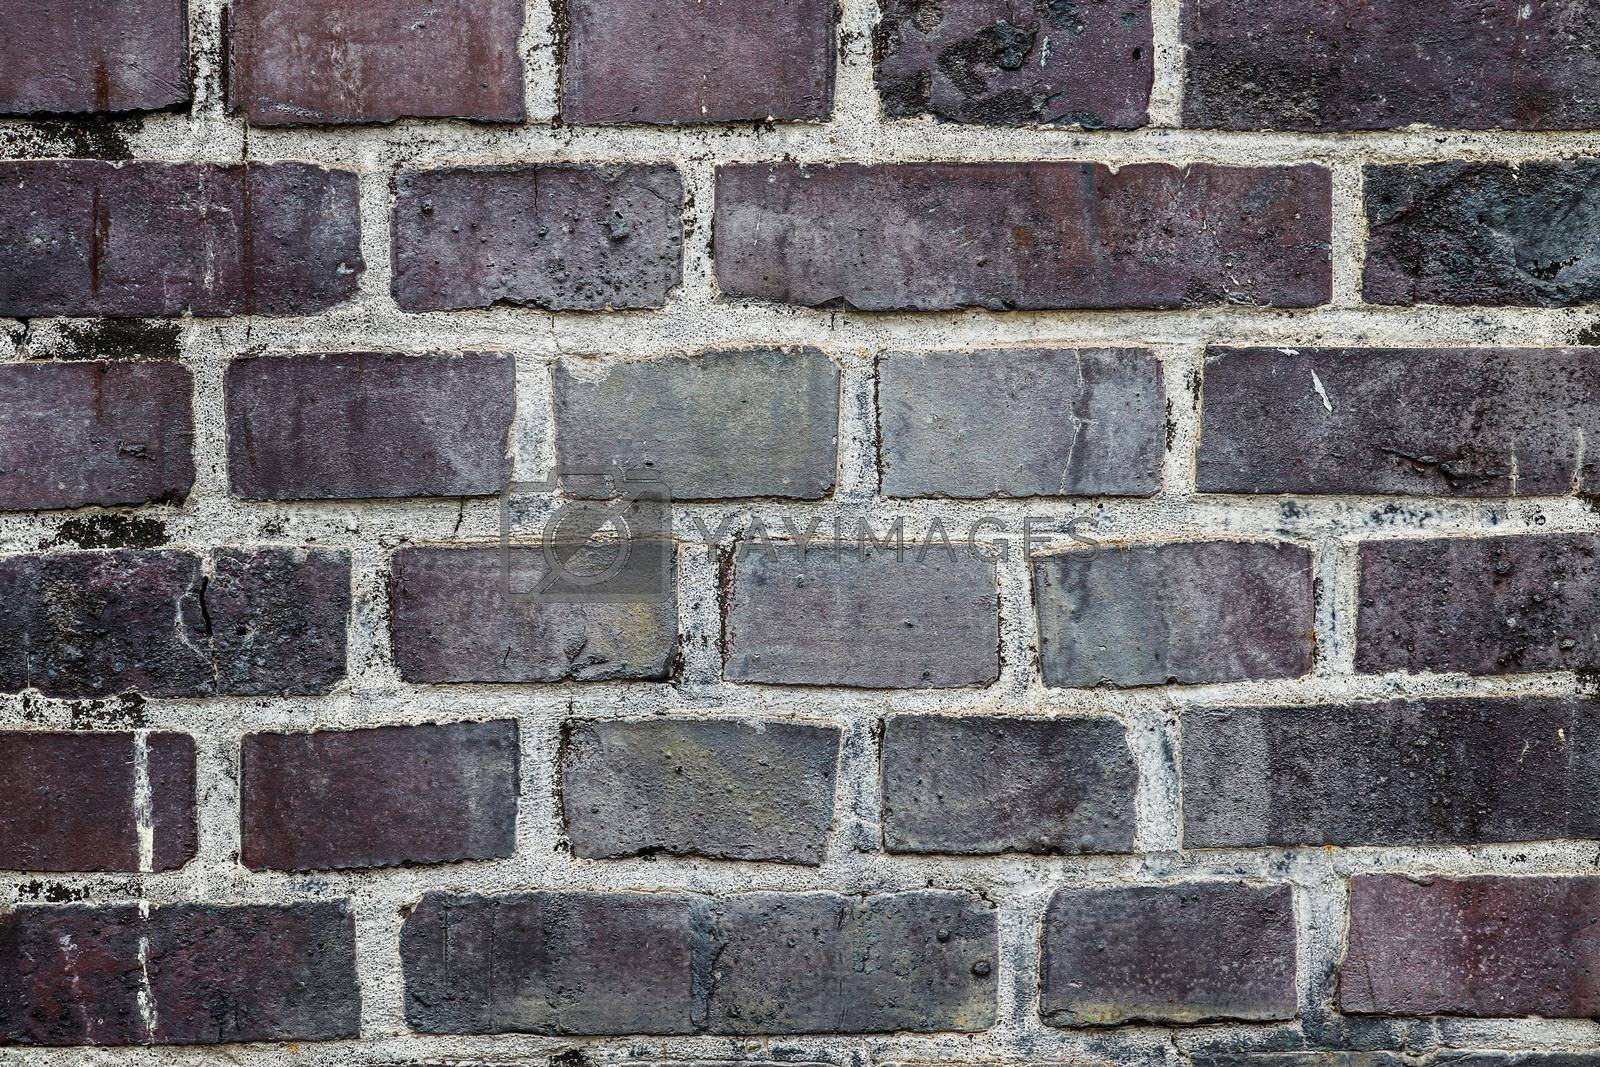 Old brick wall. Texture of old weathered brick wall panoramic background.